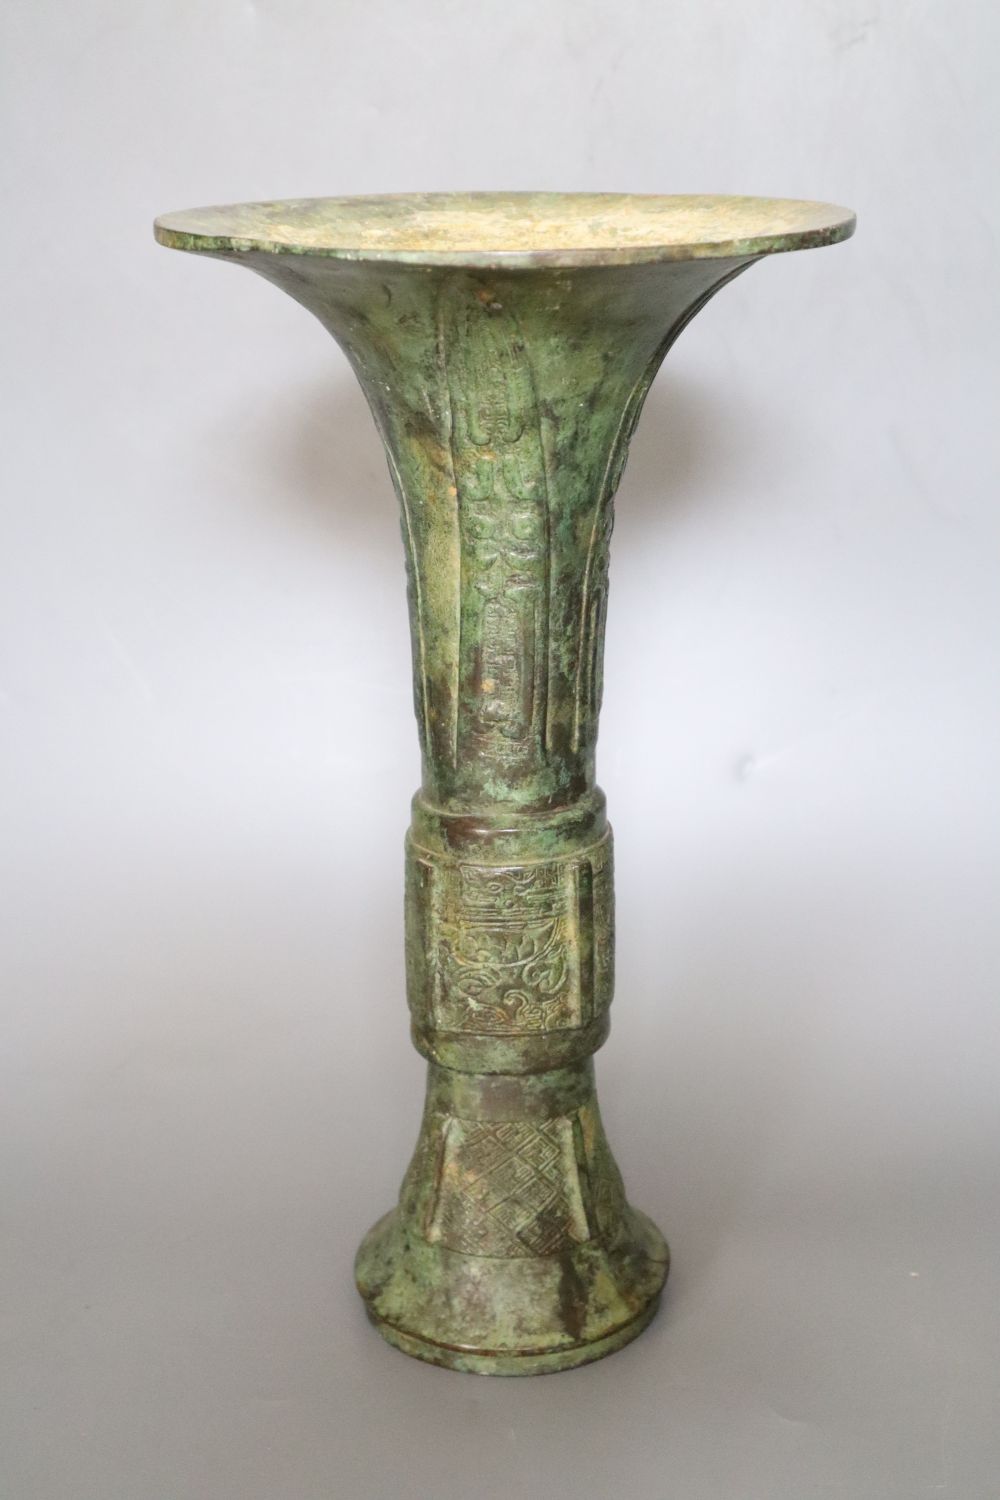 A Chinese archaistic bronze ritual vessel, Gu, Shang dynasty style